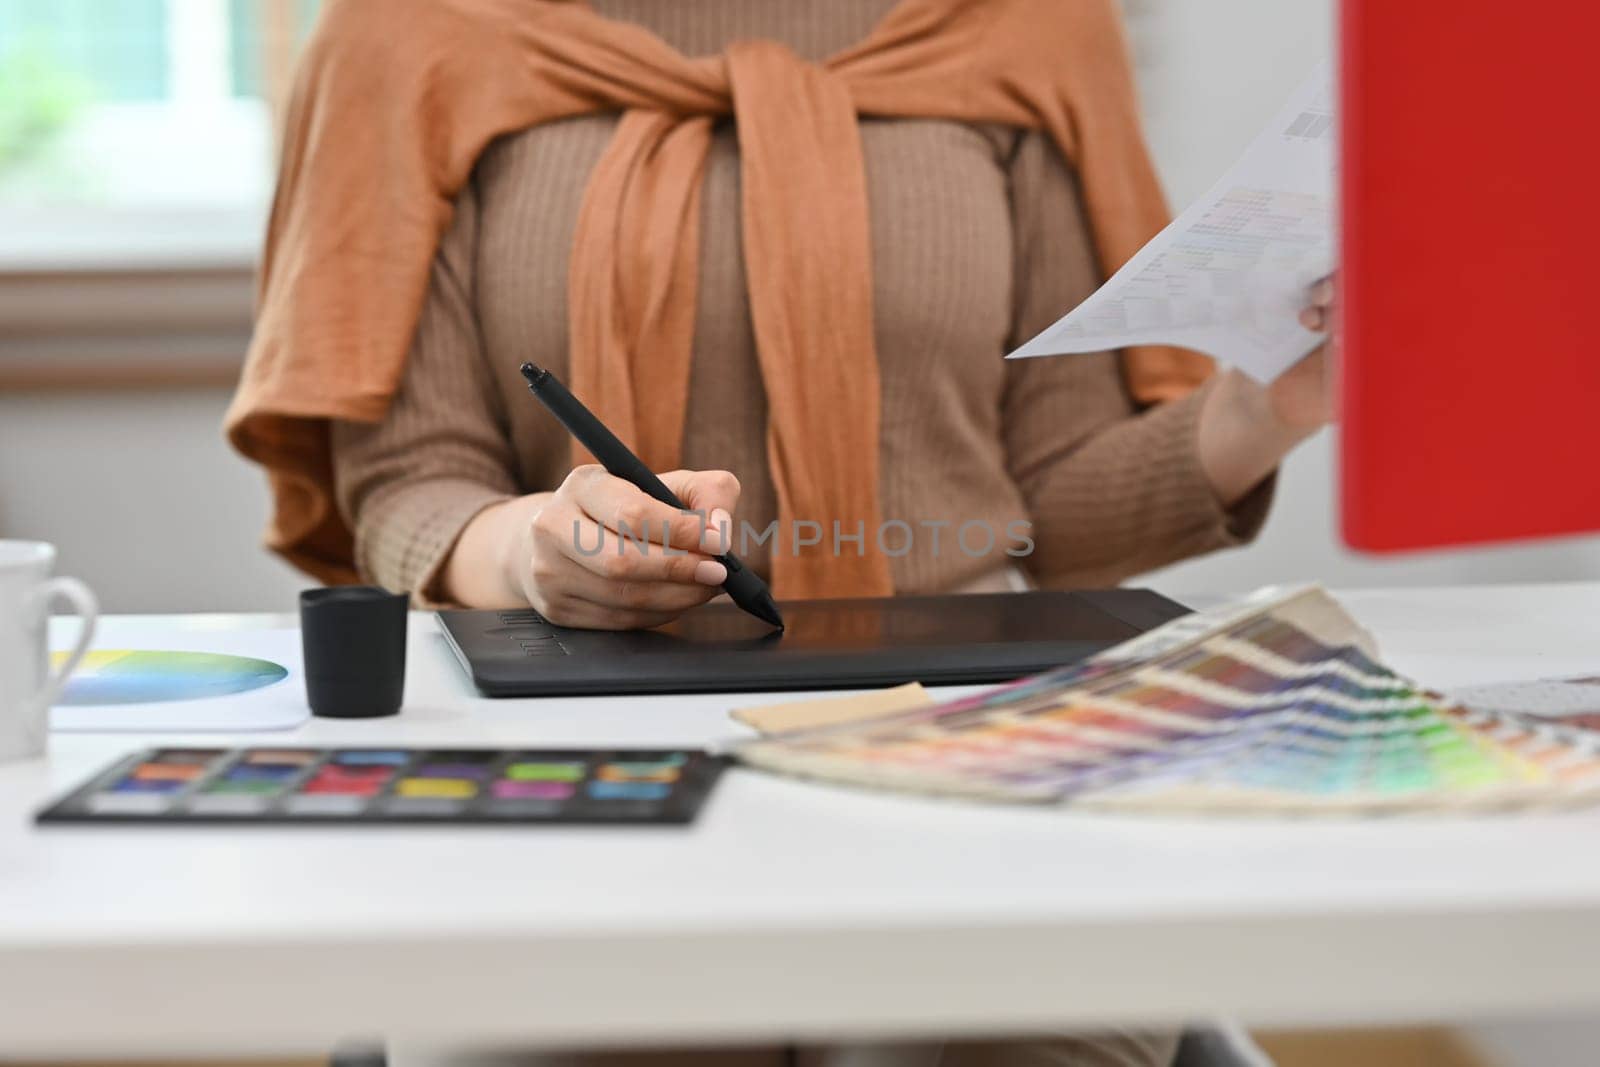 Young creative woman using graphic tablet and working with color swatch samples at workstation.